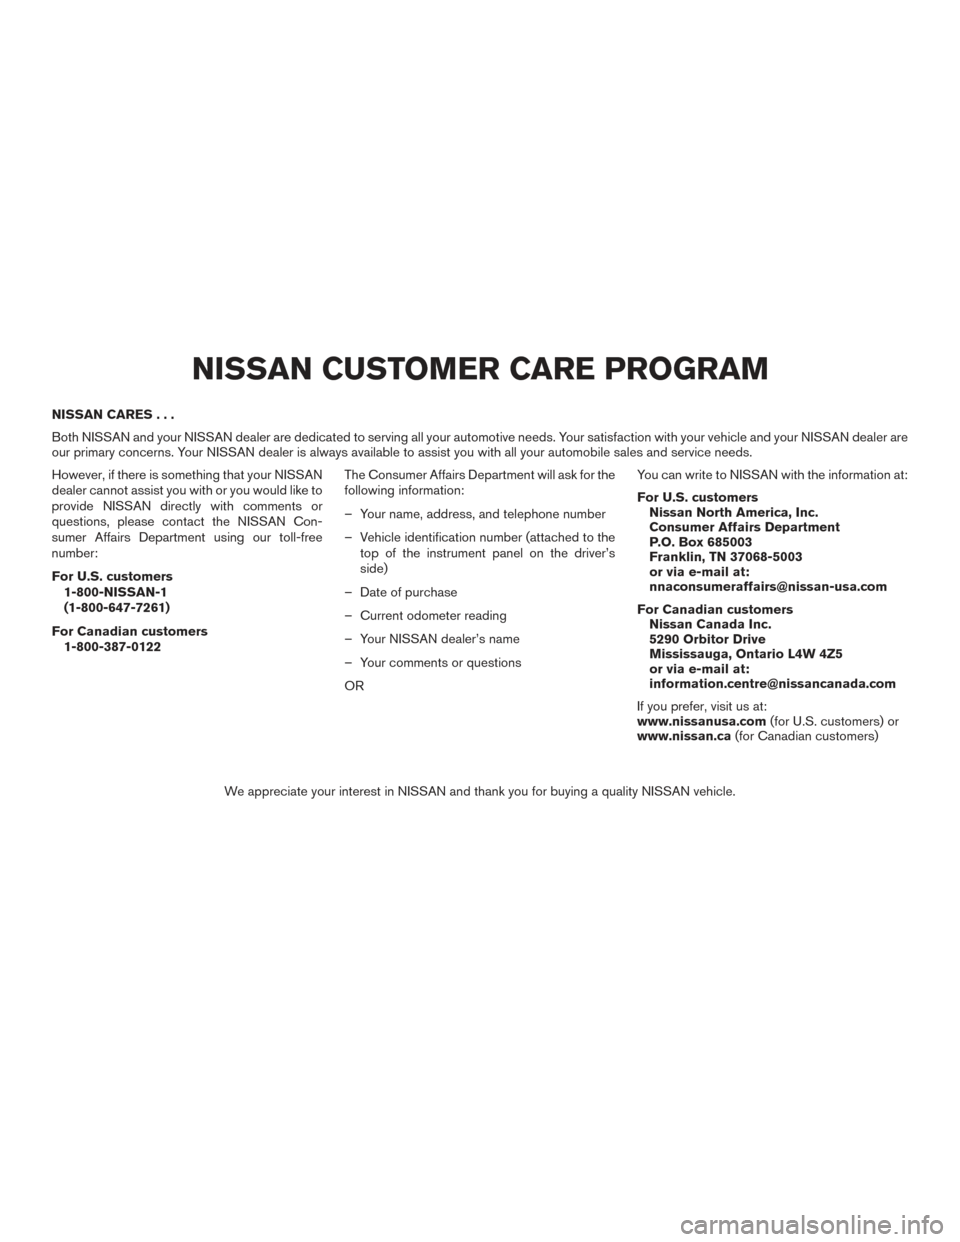 NISSAN ALTIMA 2016 L33 / 5.G Owners Manual NISSAN CARES...
Both NISSAN and your NISSAN dealer are dedicated to serving all your automotive needs. Your satisfaction with your vehicle and your NISSAN dealer are
our primary concerns. Your NISSAN 